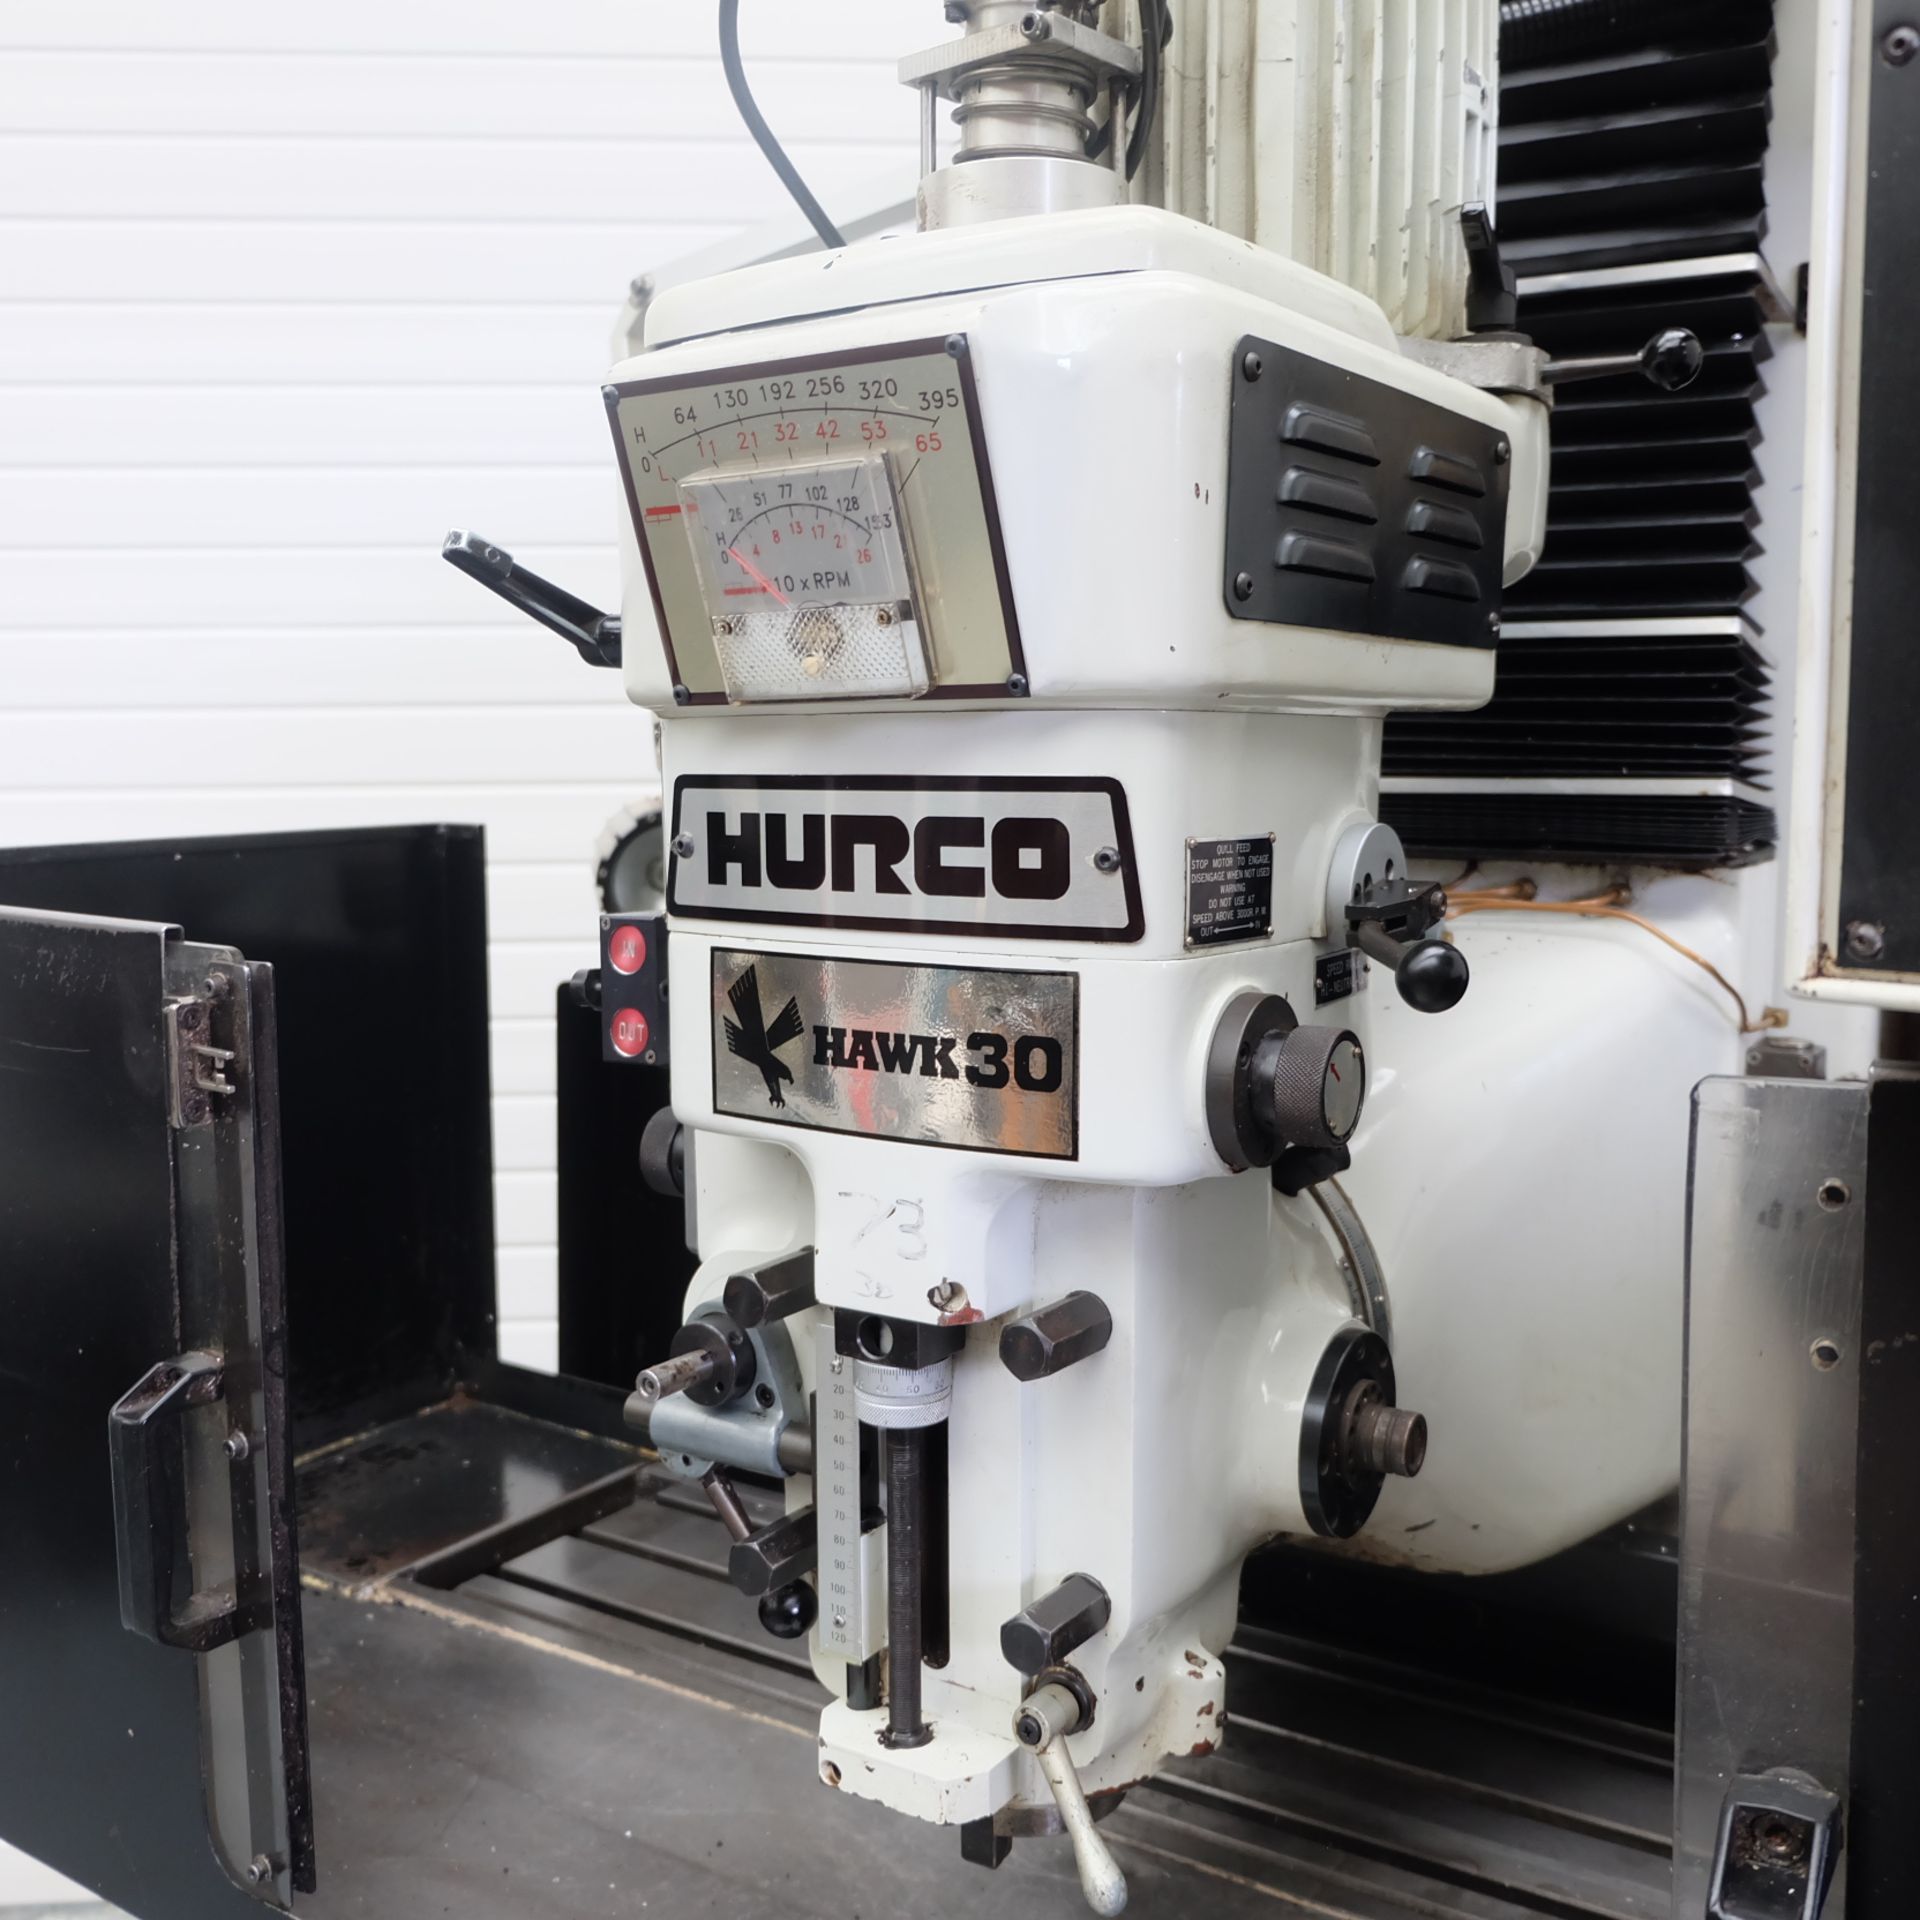 Hurco Hawk 30 CNC 3 Axis Vertical CNC Mill With Ultimax 55m Control. - Image 5 of 15